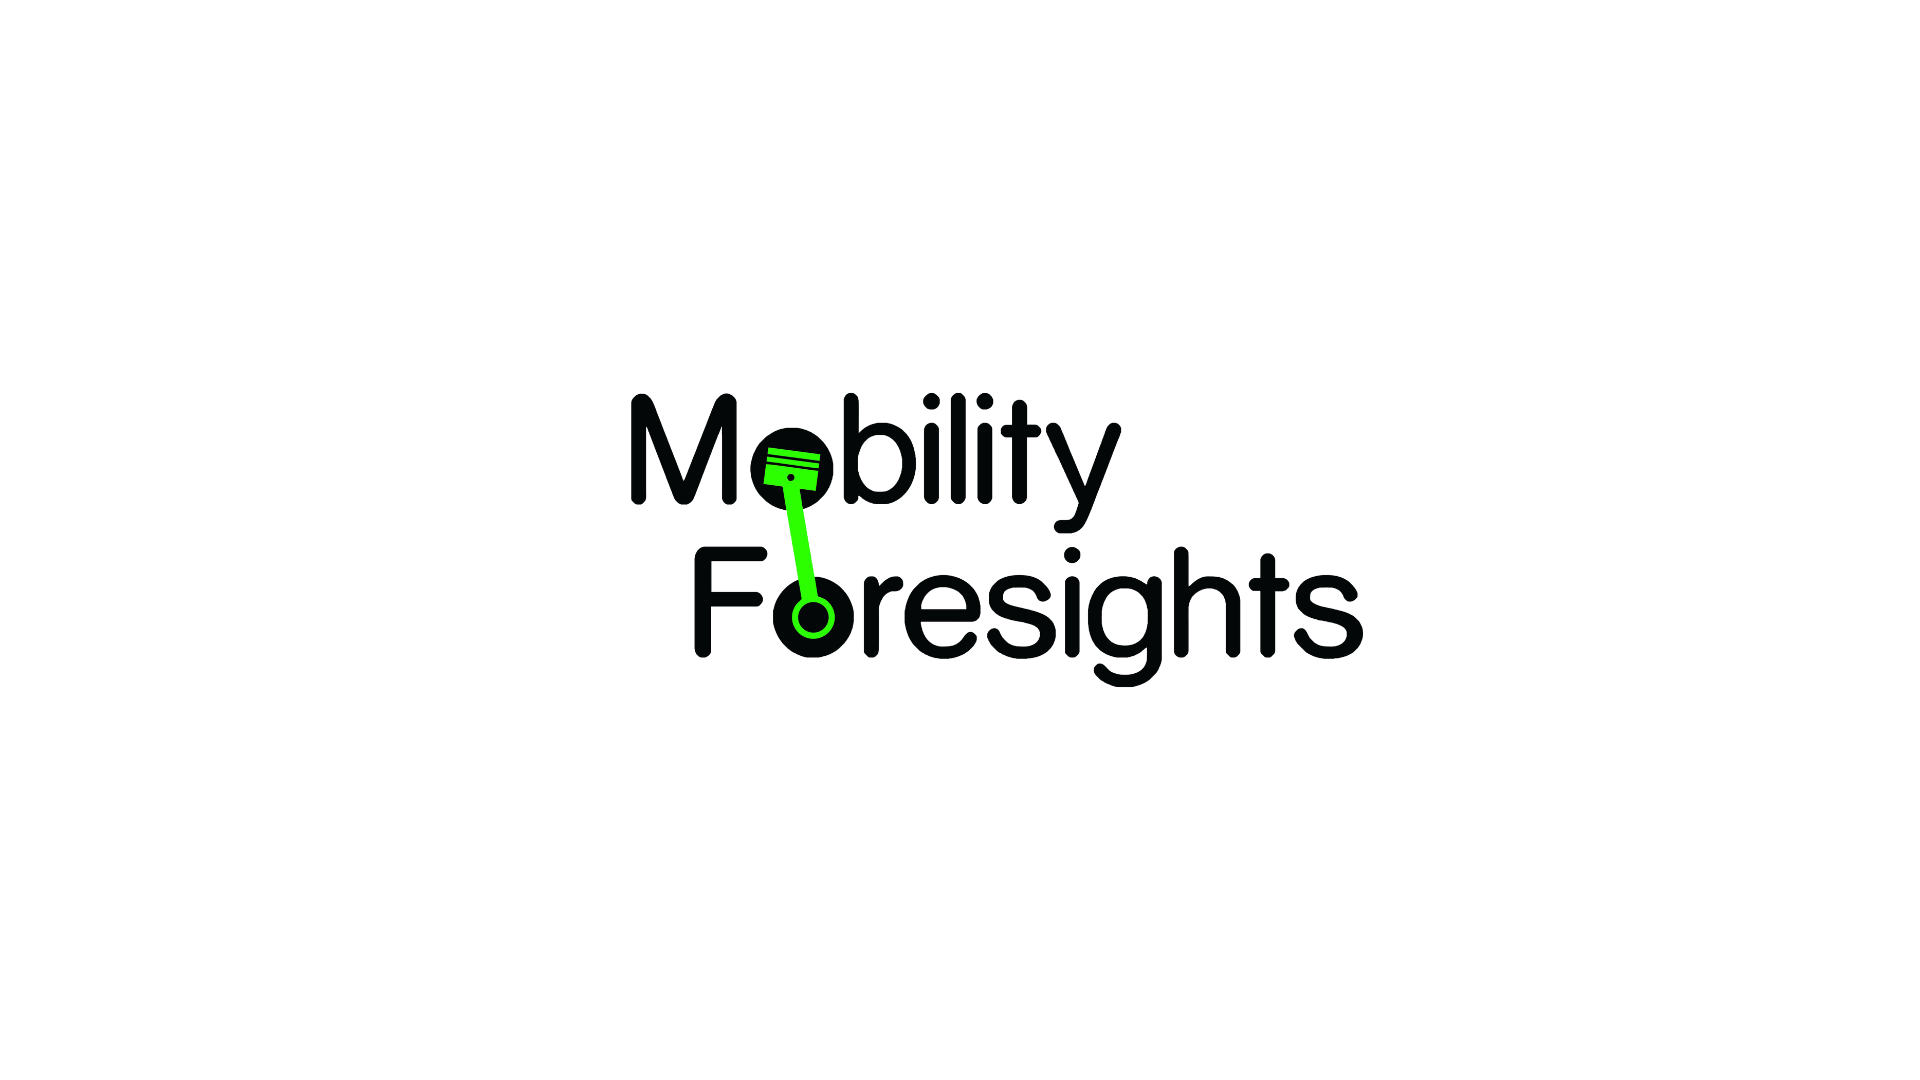 Mobility foresights.png